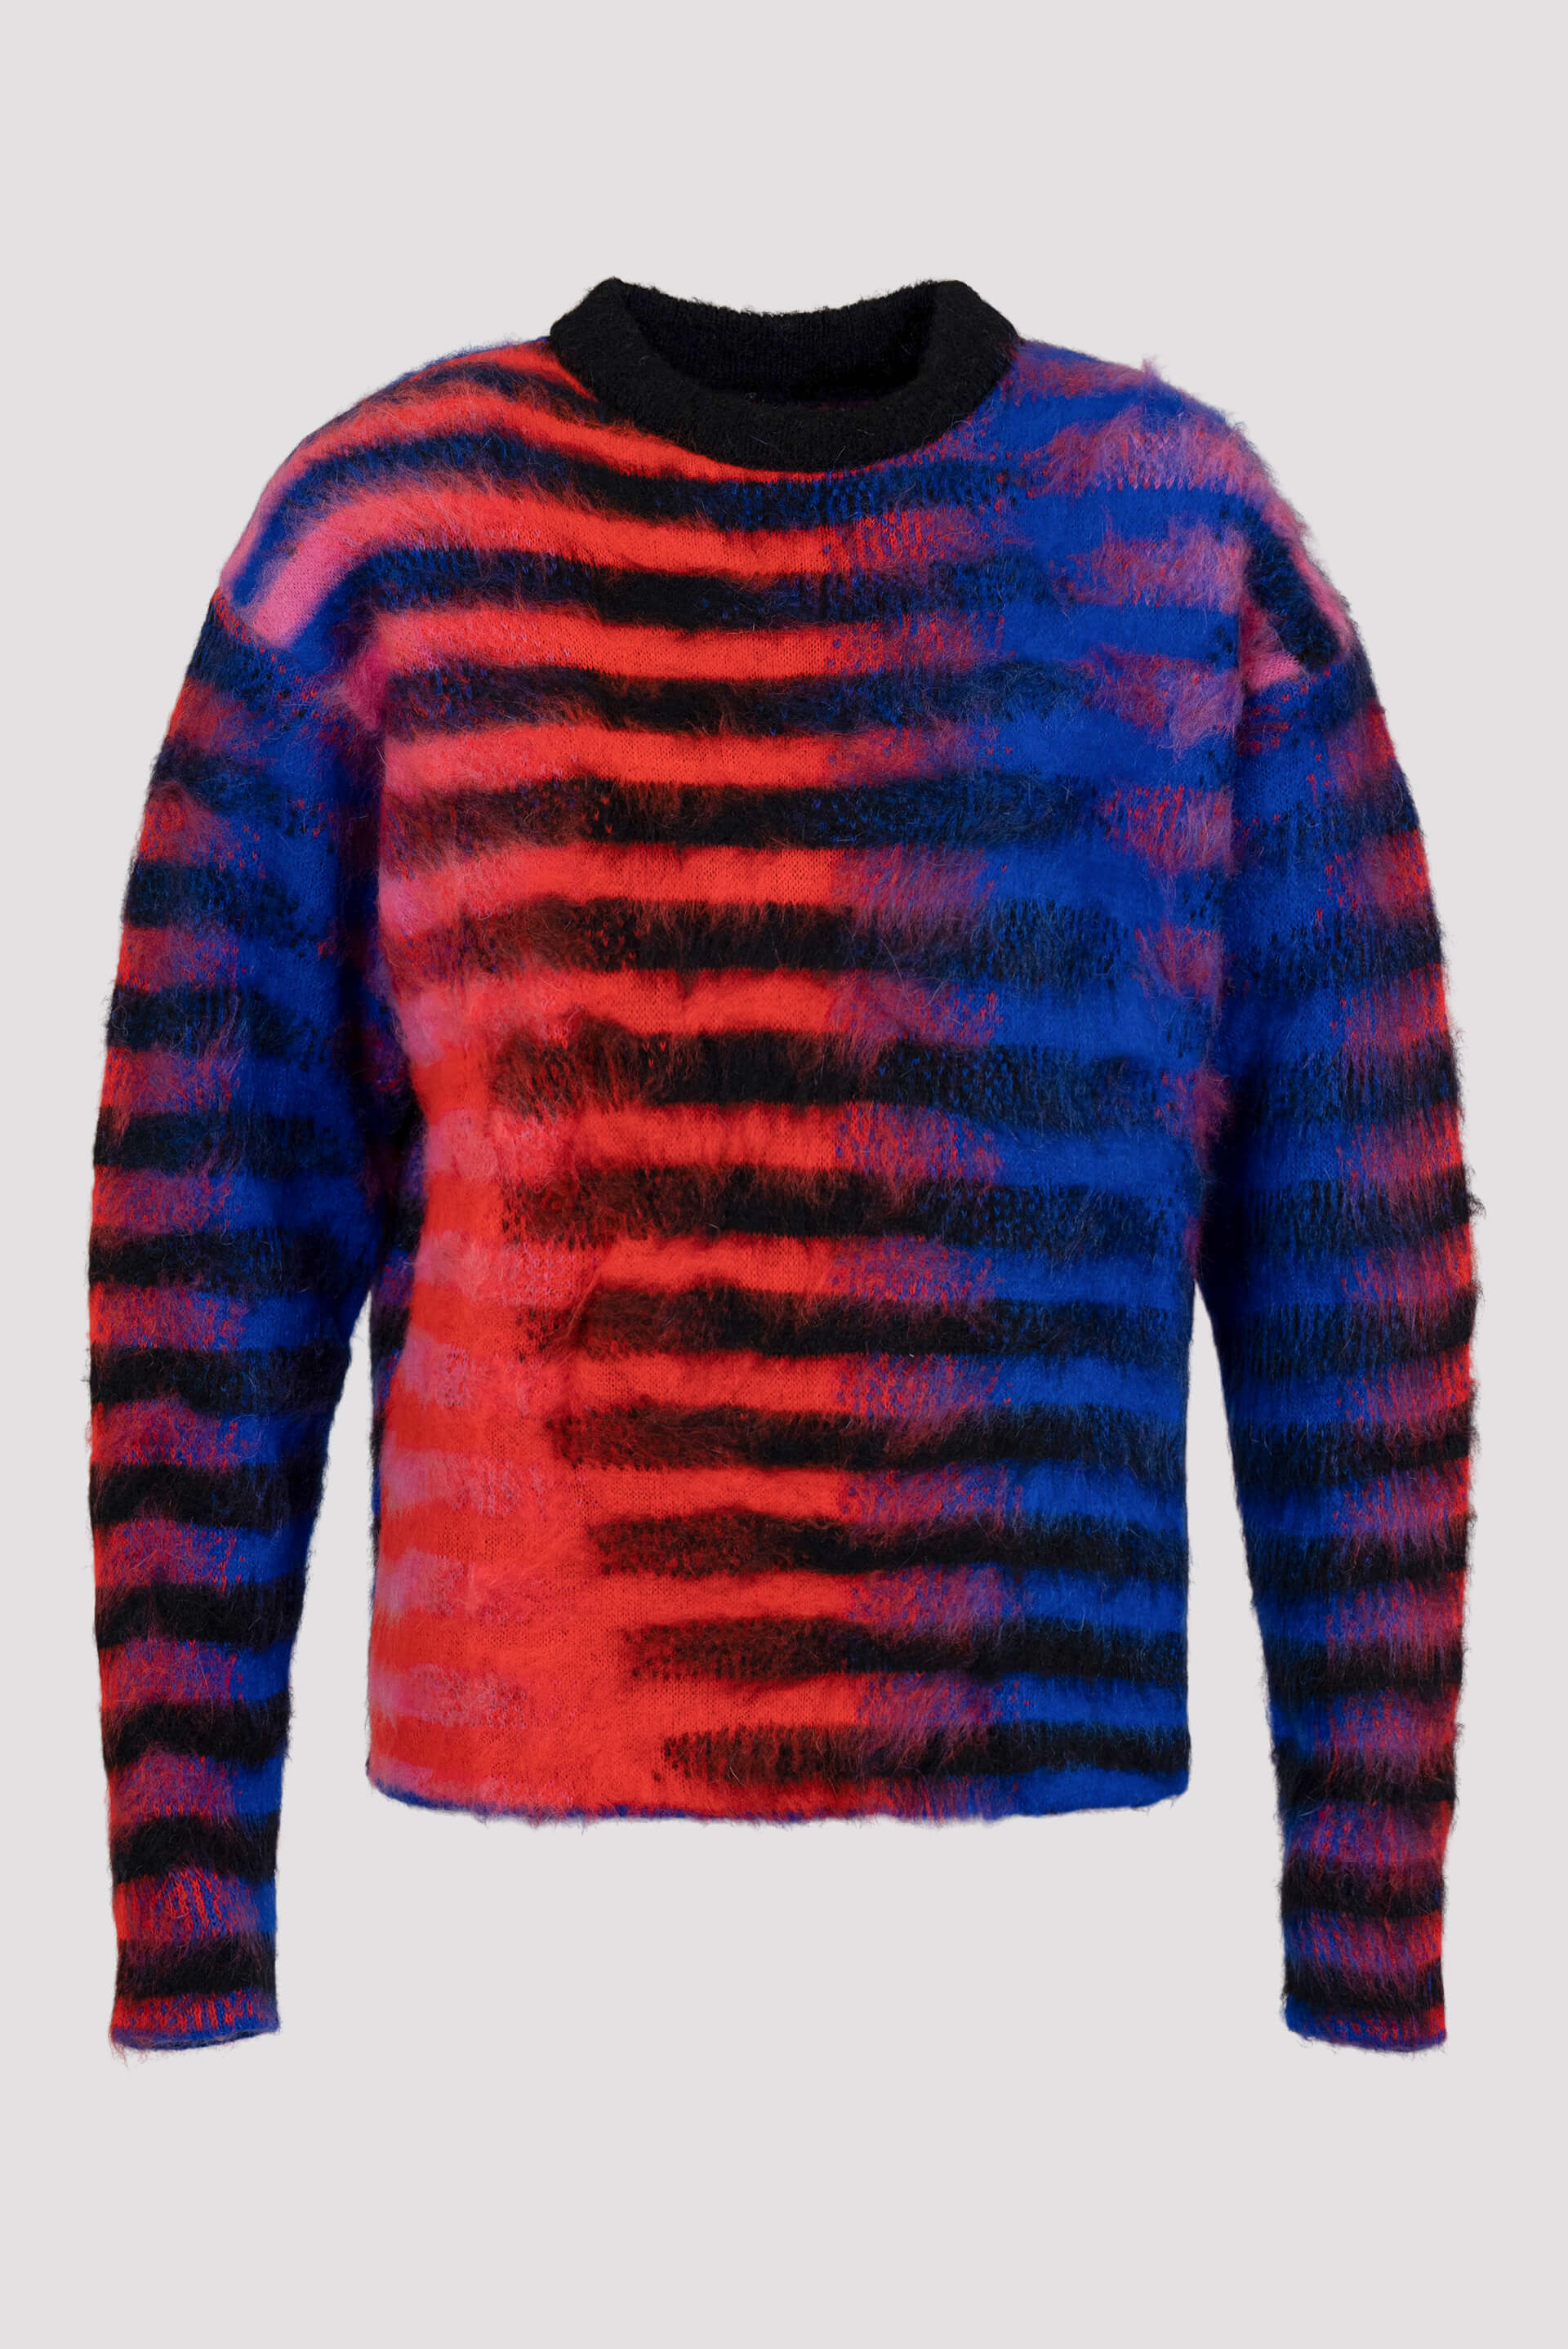 AGR Graphic Stripe Mohair Crew Neck Sweater - Fabric of Society